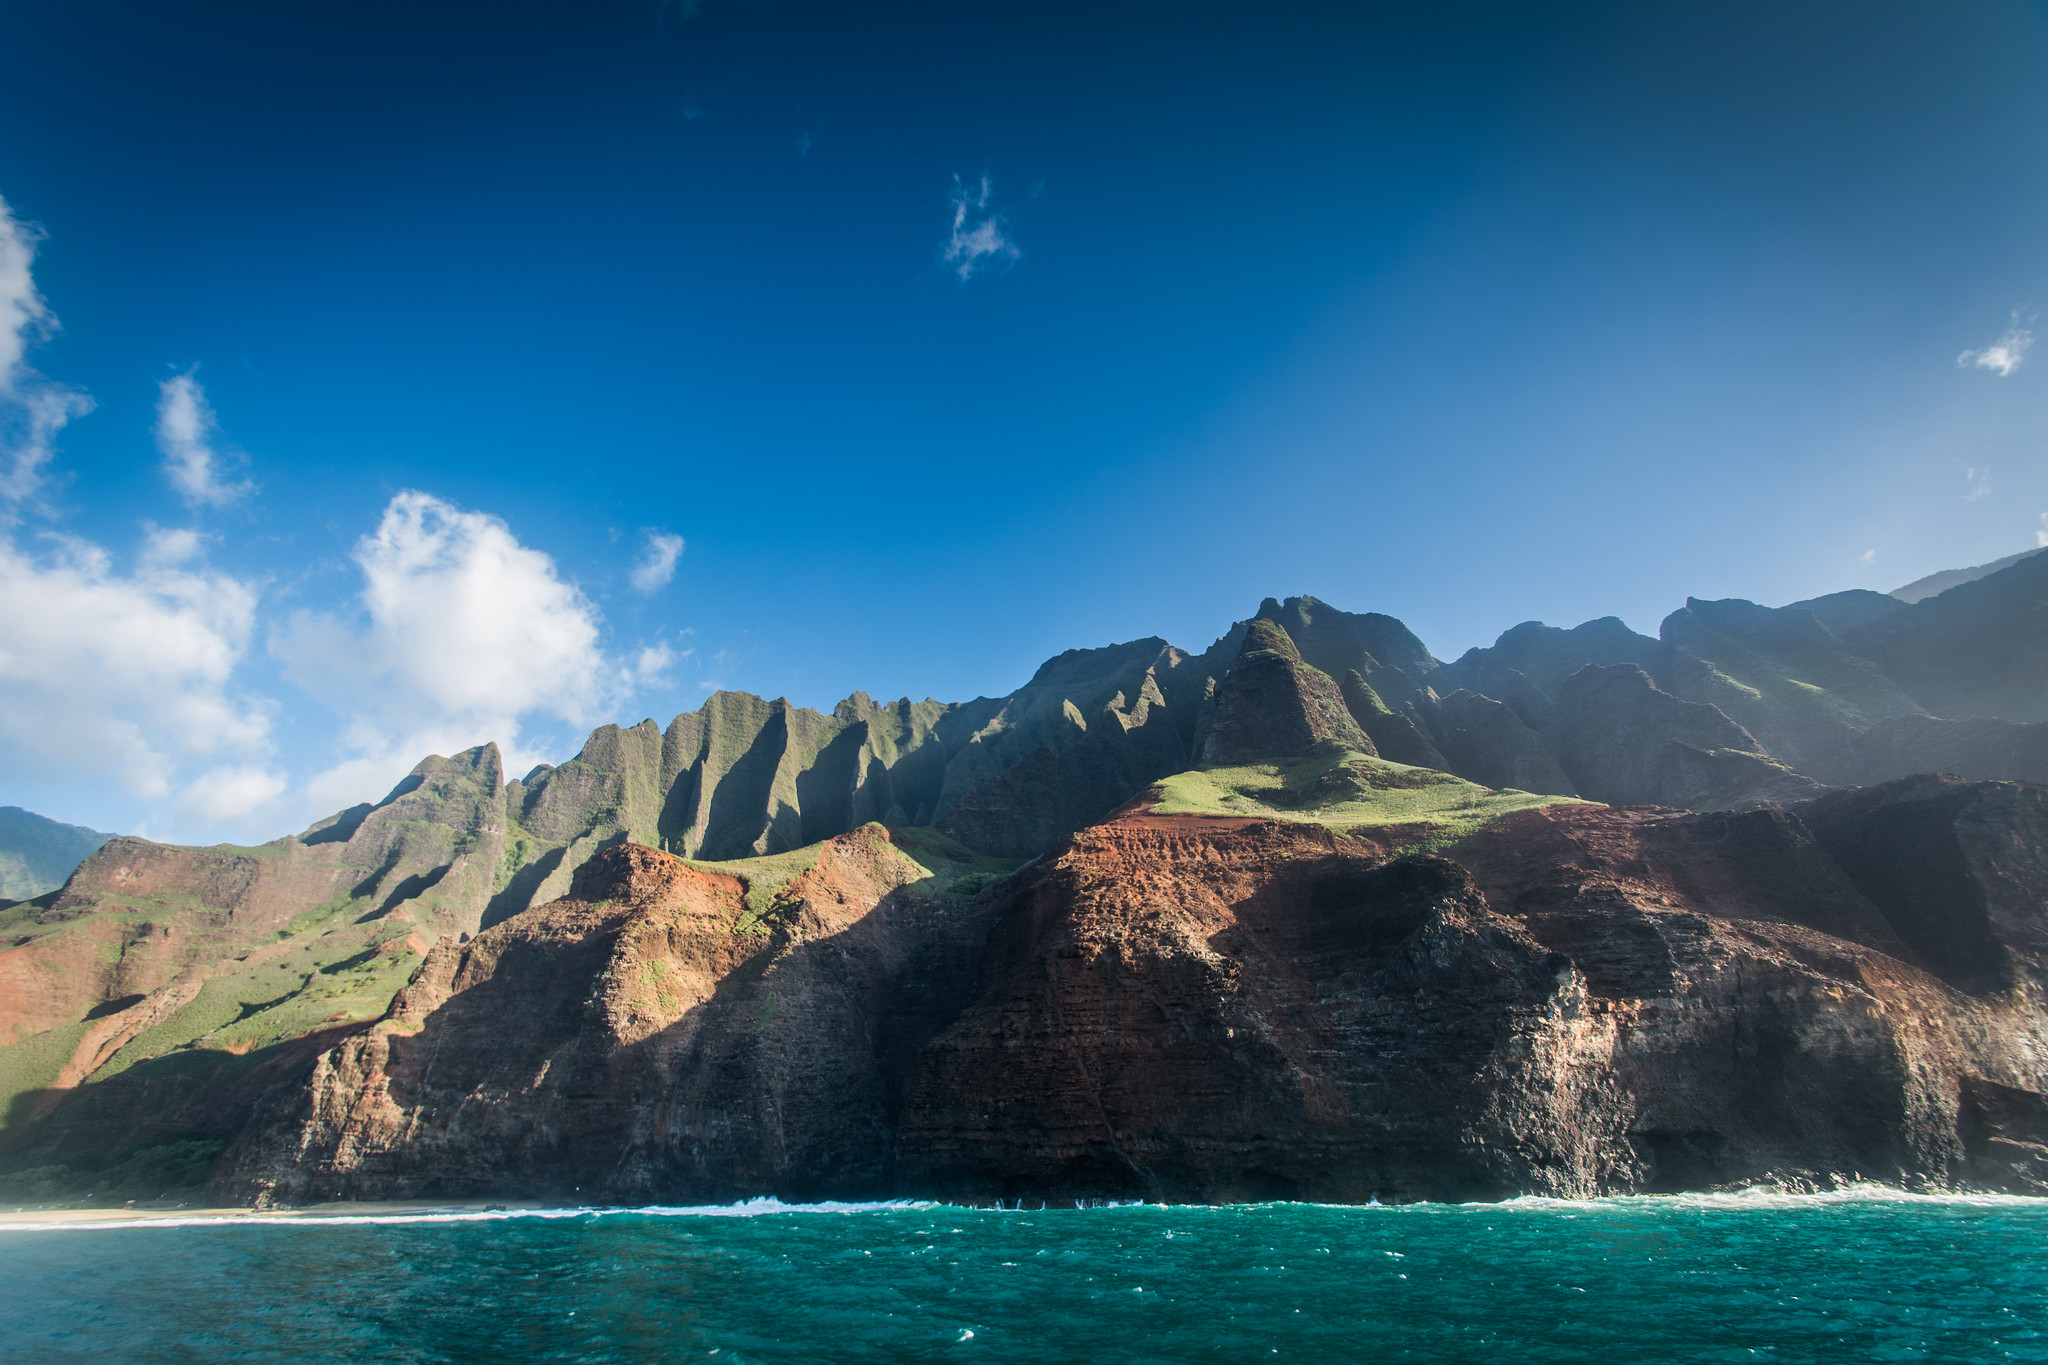 Island cliffside with clear blue water in the foreground and lightly cloudy blue sky in the background.